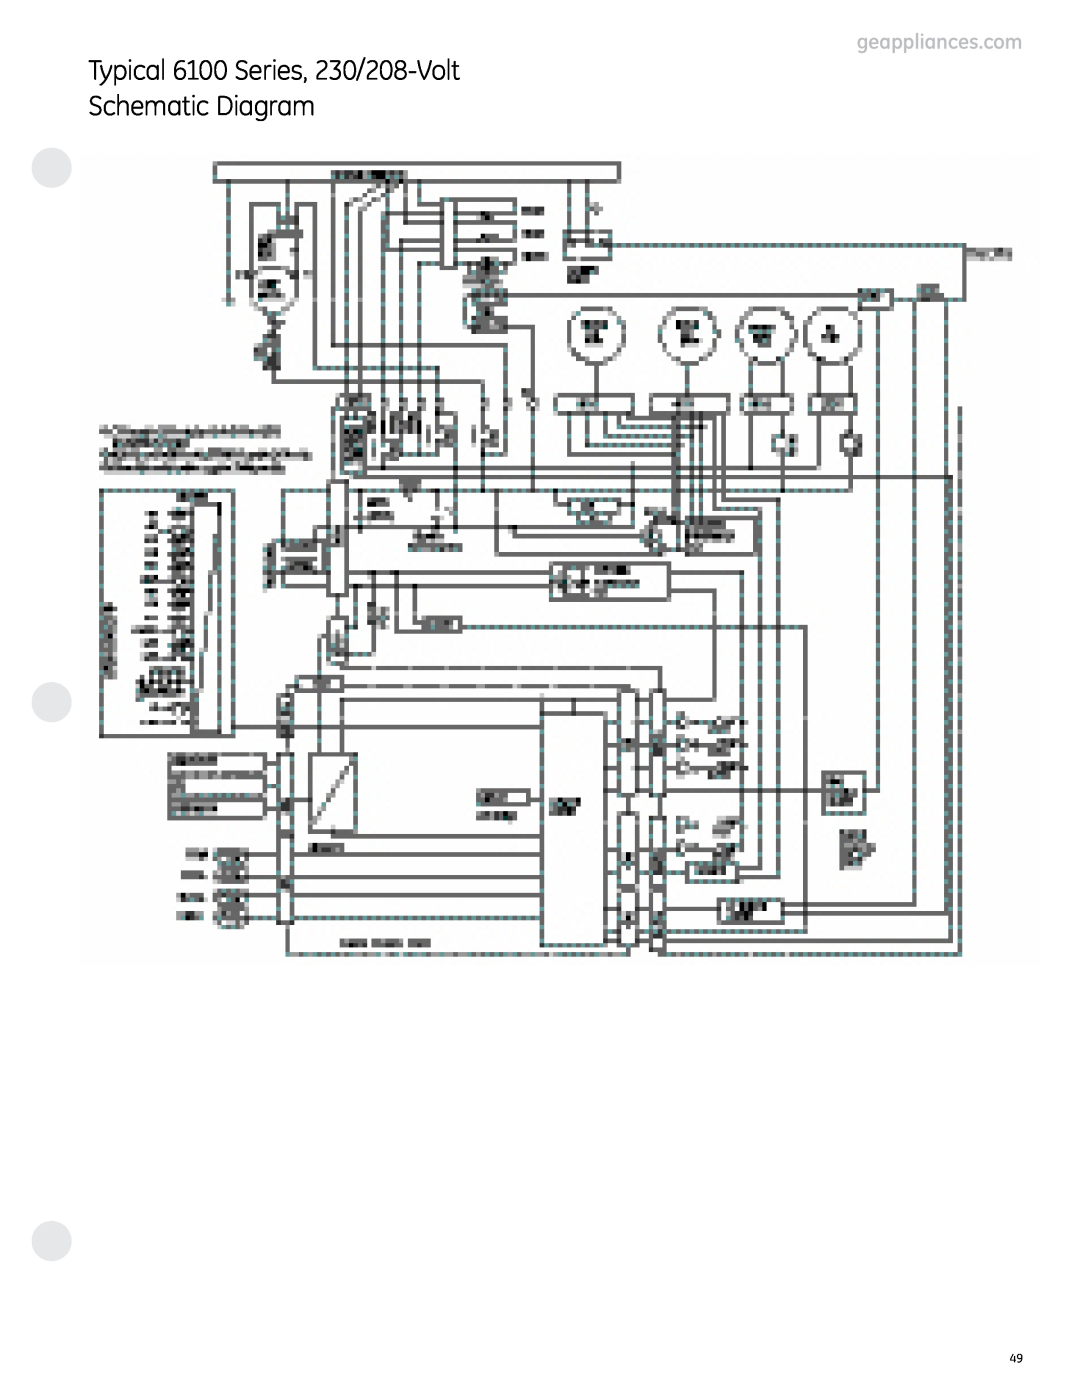 GE 4100 manual Typical 6100 Series, 230/208-Volt, Schematic Diagram 